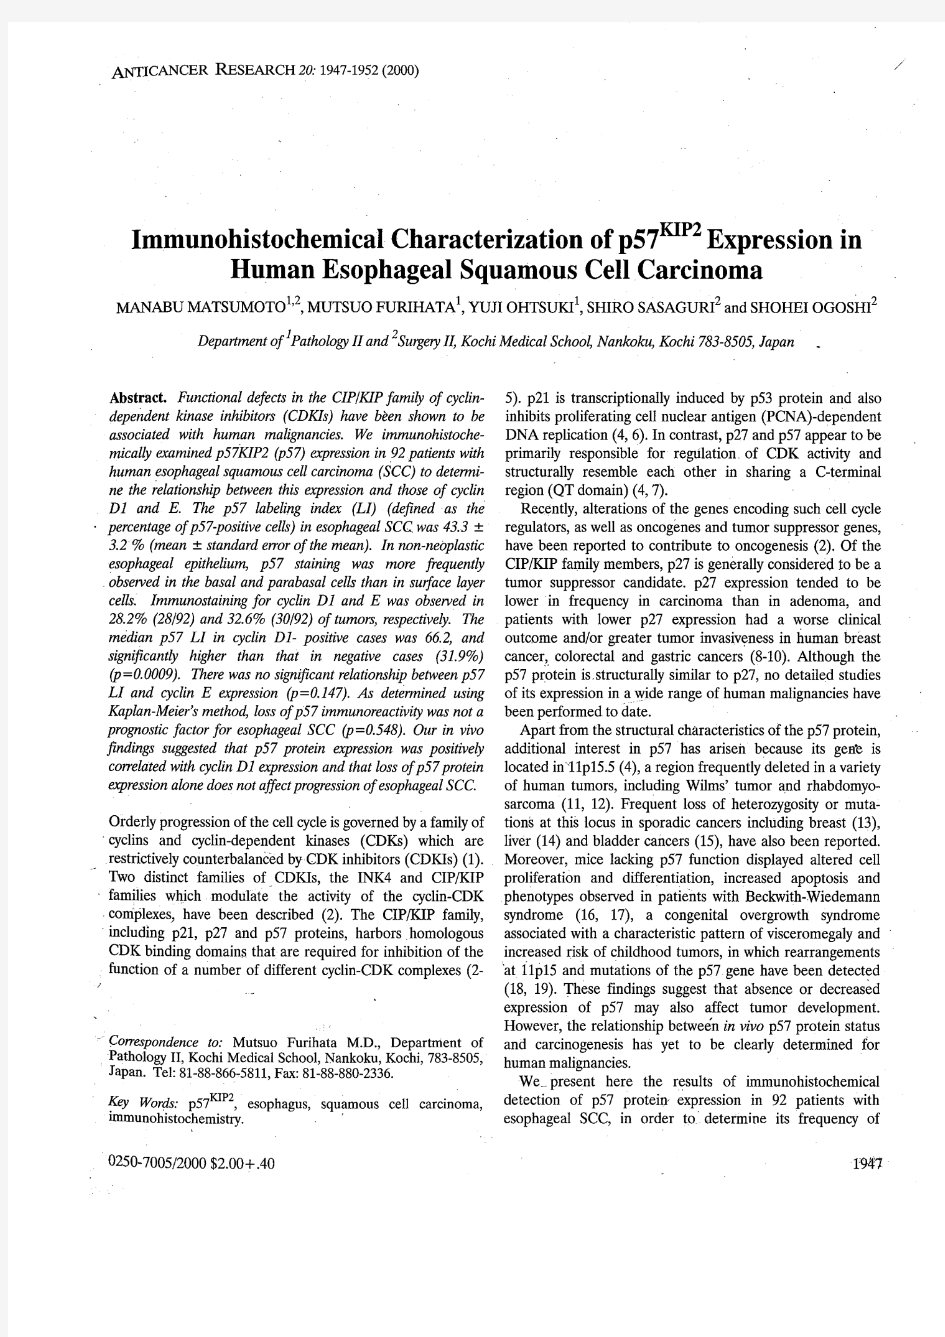 Immunohistochemical characterization of p57KIP2 expression in human esophageal squamous cell